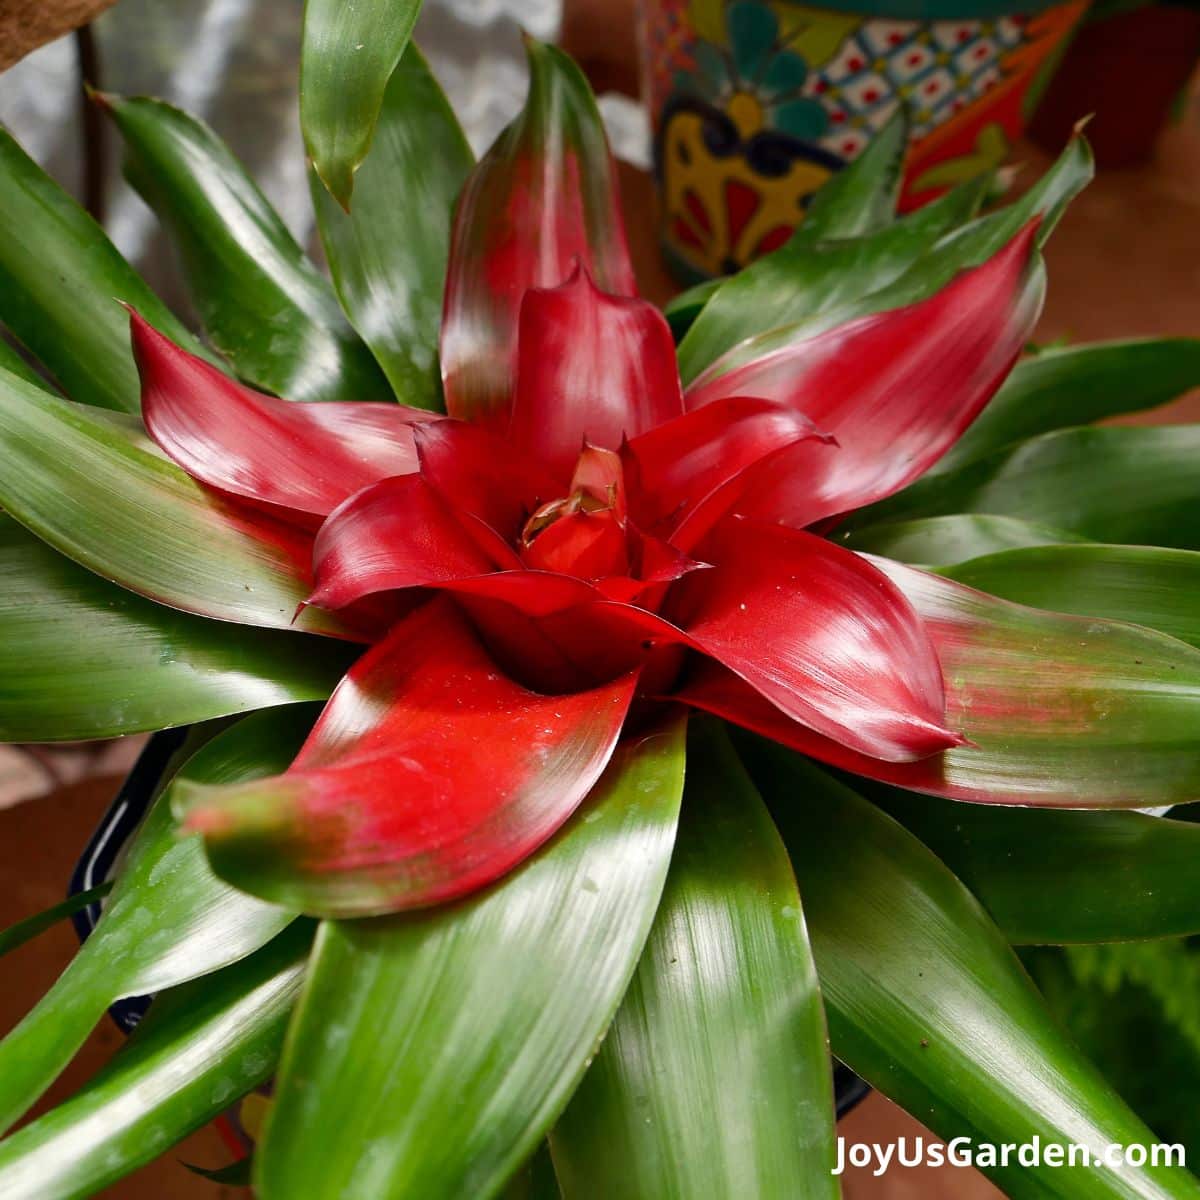 Neoregelias Bromeliad with red flower and green foliage